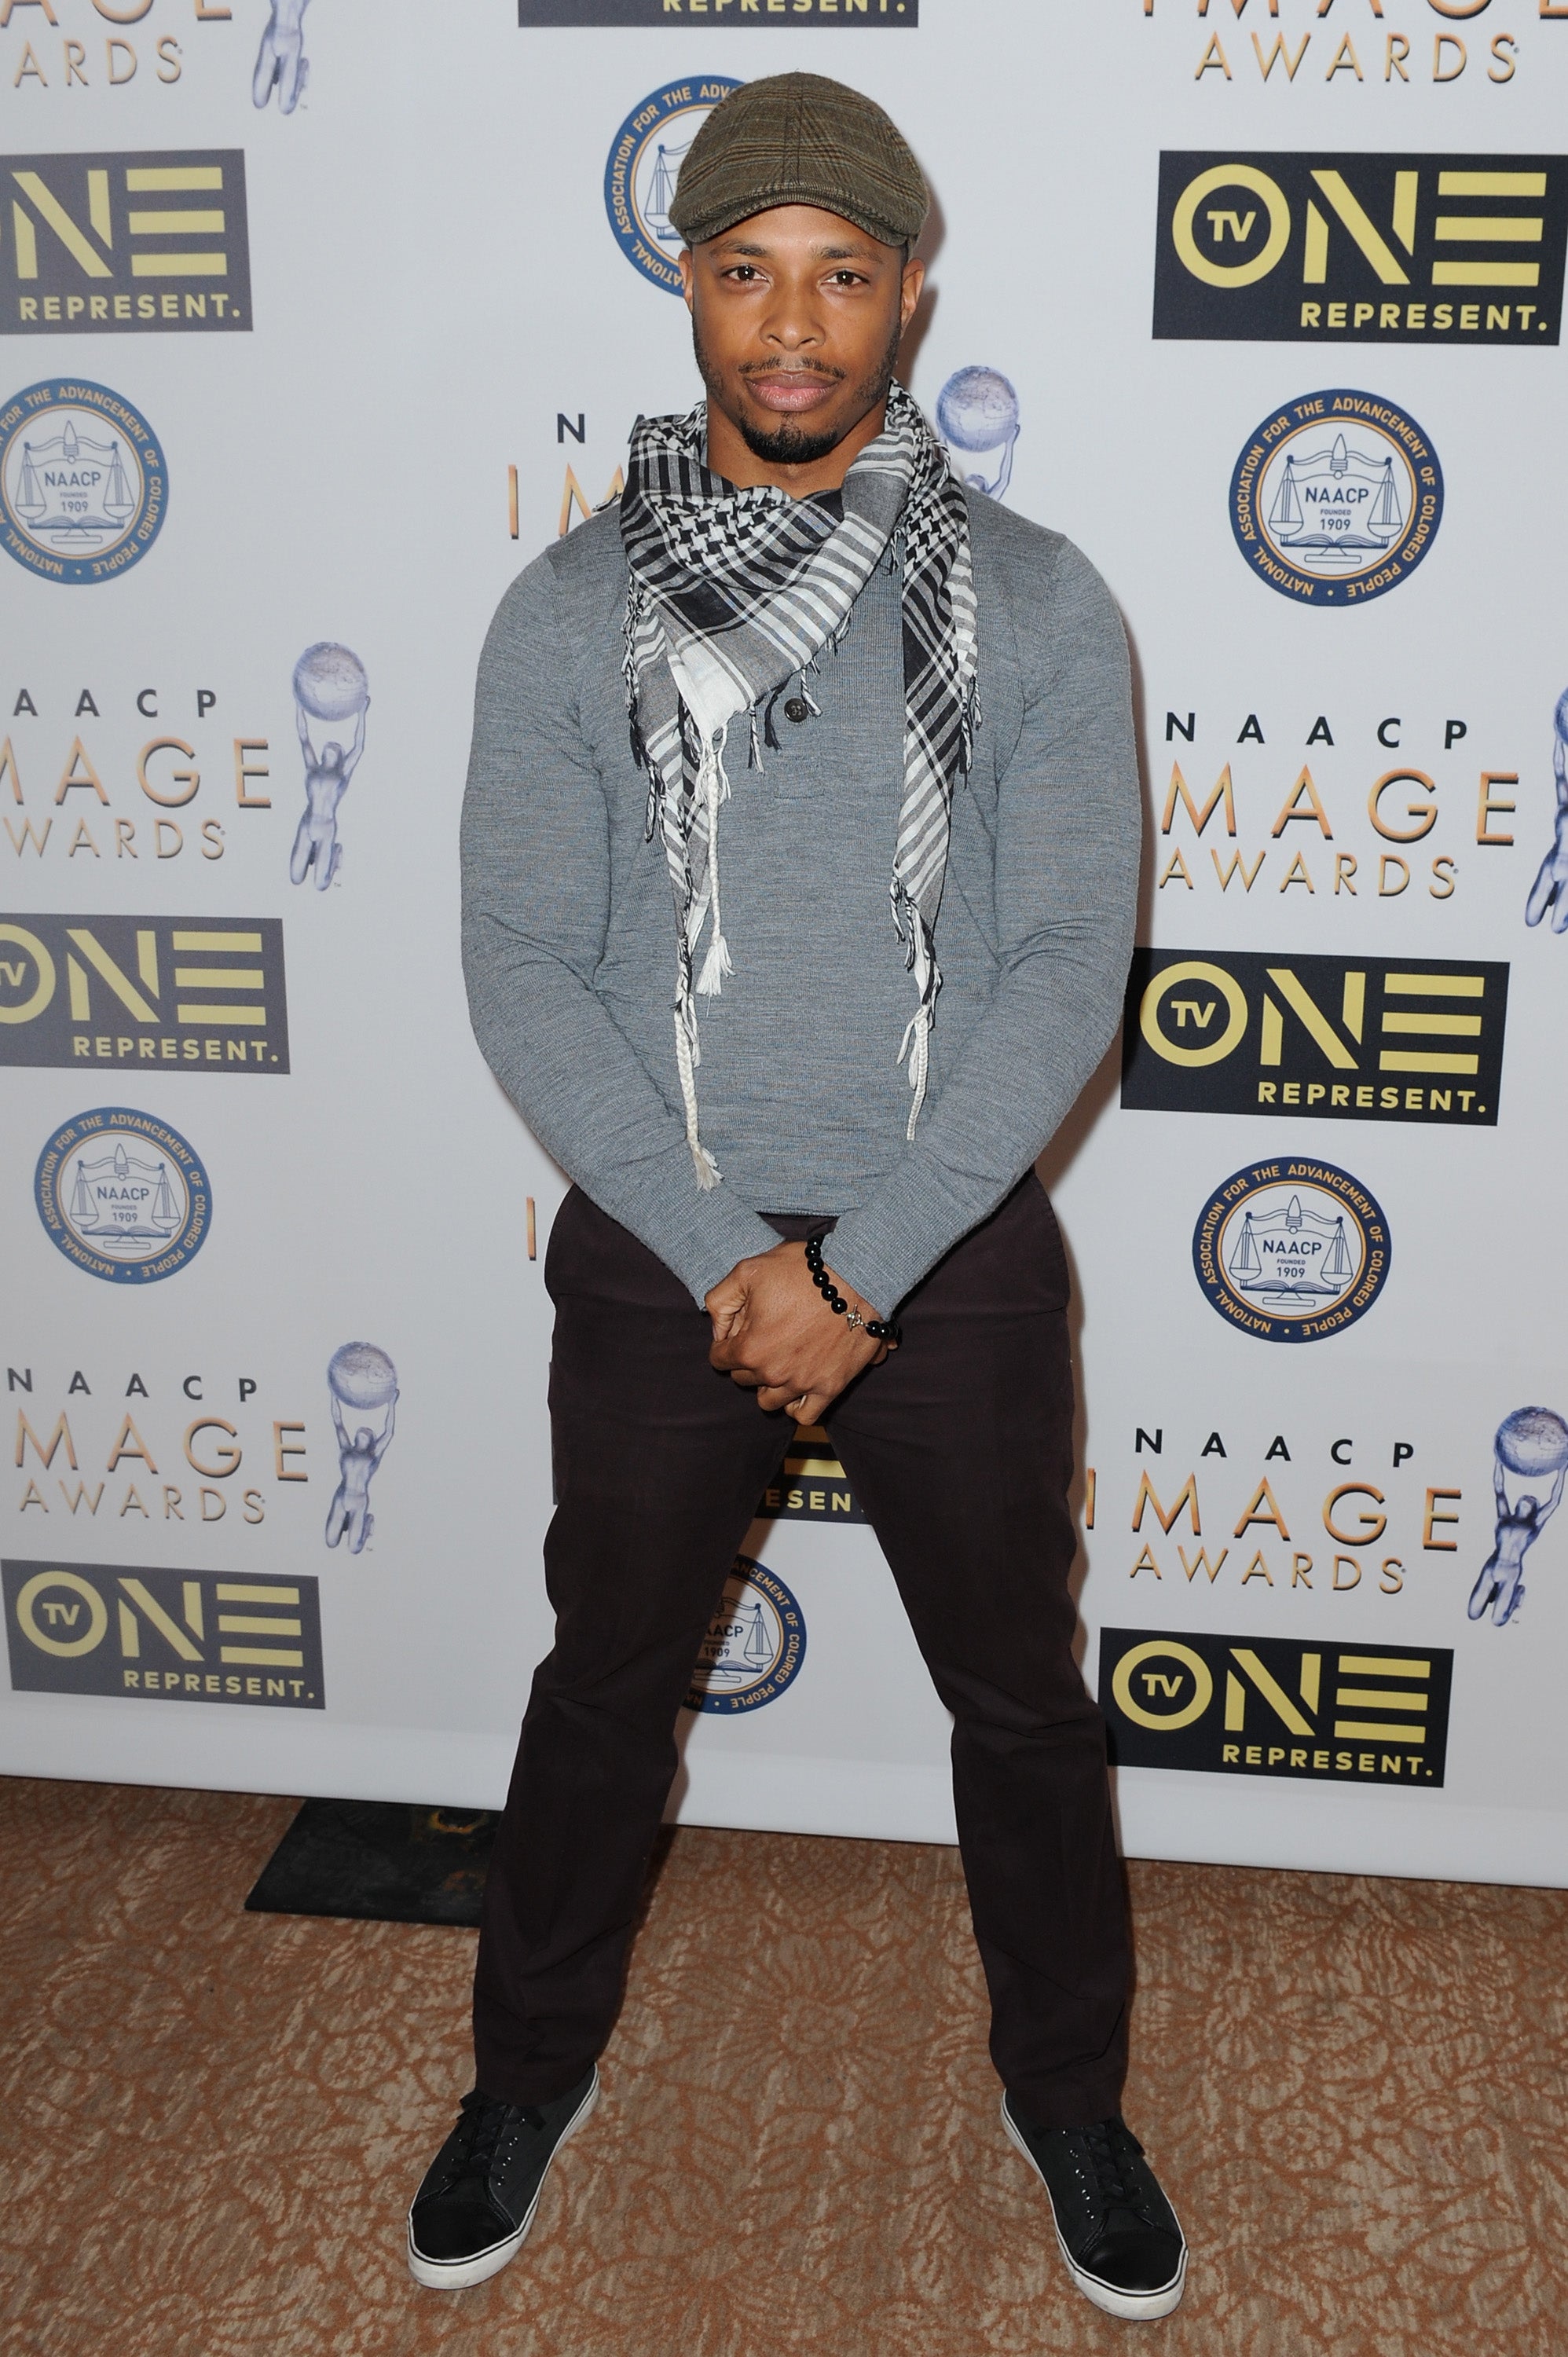 A Look Inside the 47th NAACP Image Awards Nominees' Luncheon
